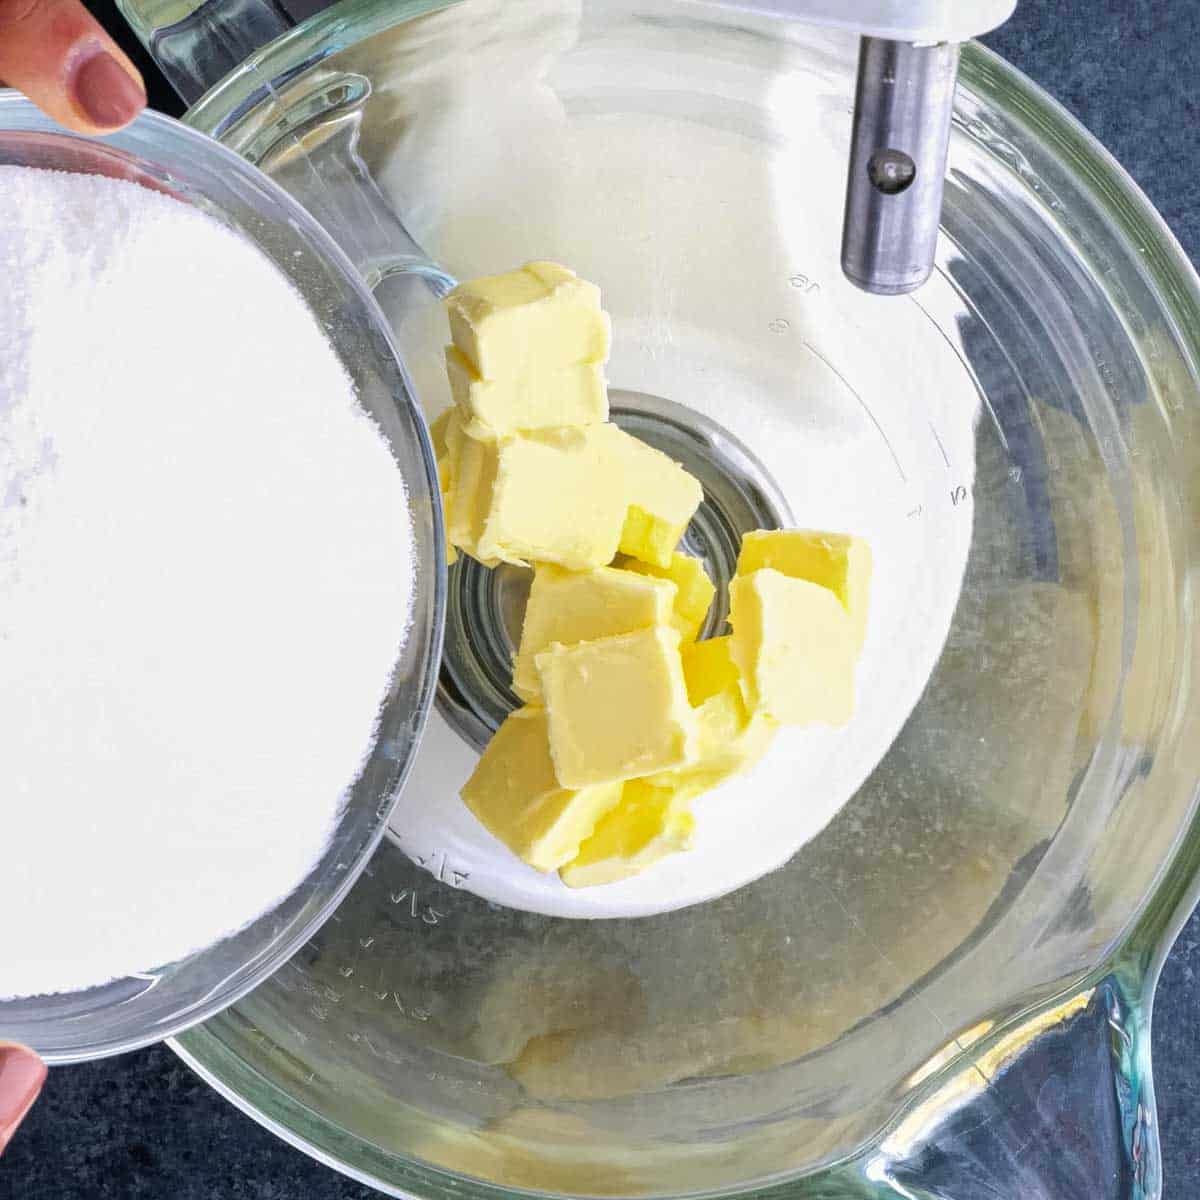 A person mixing butter and sugar in a bowl.